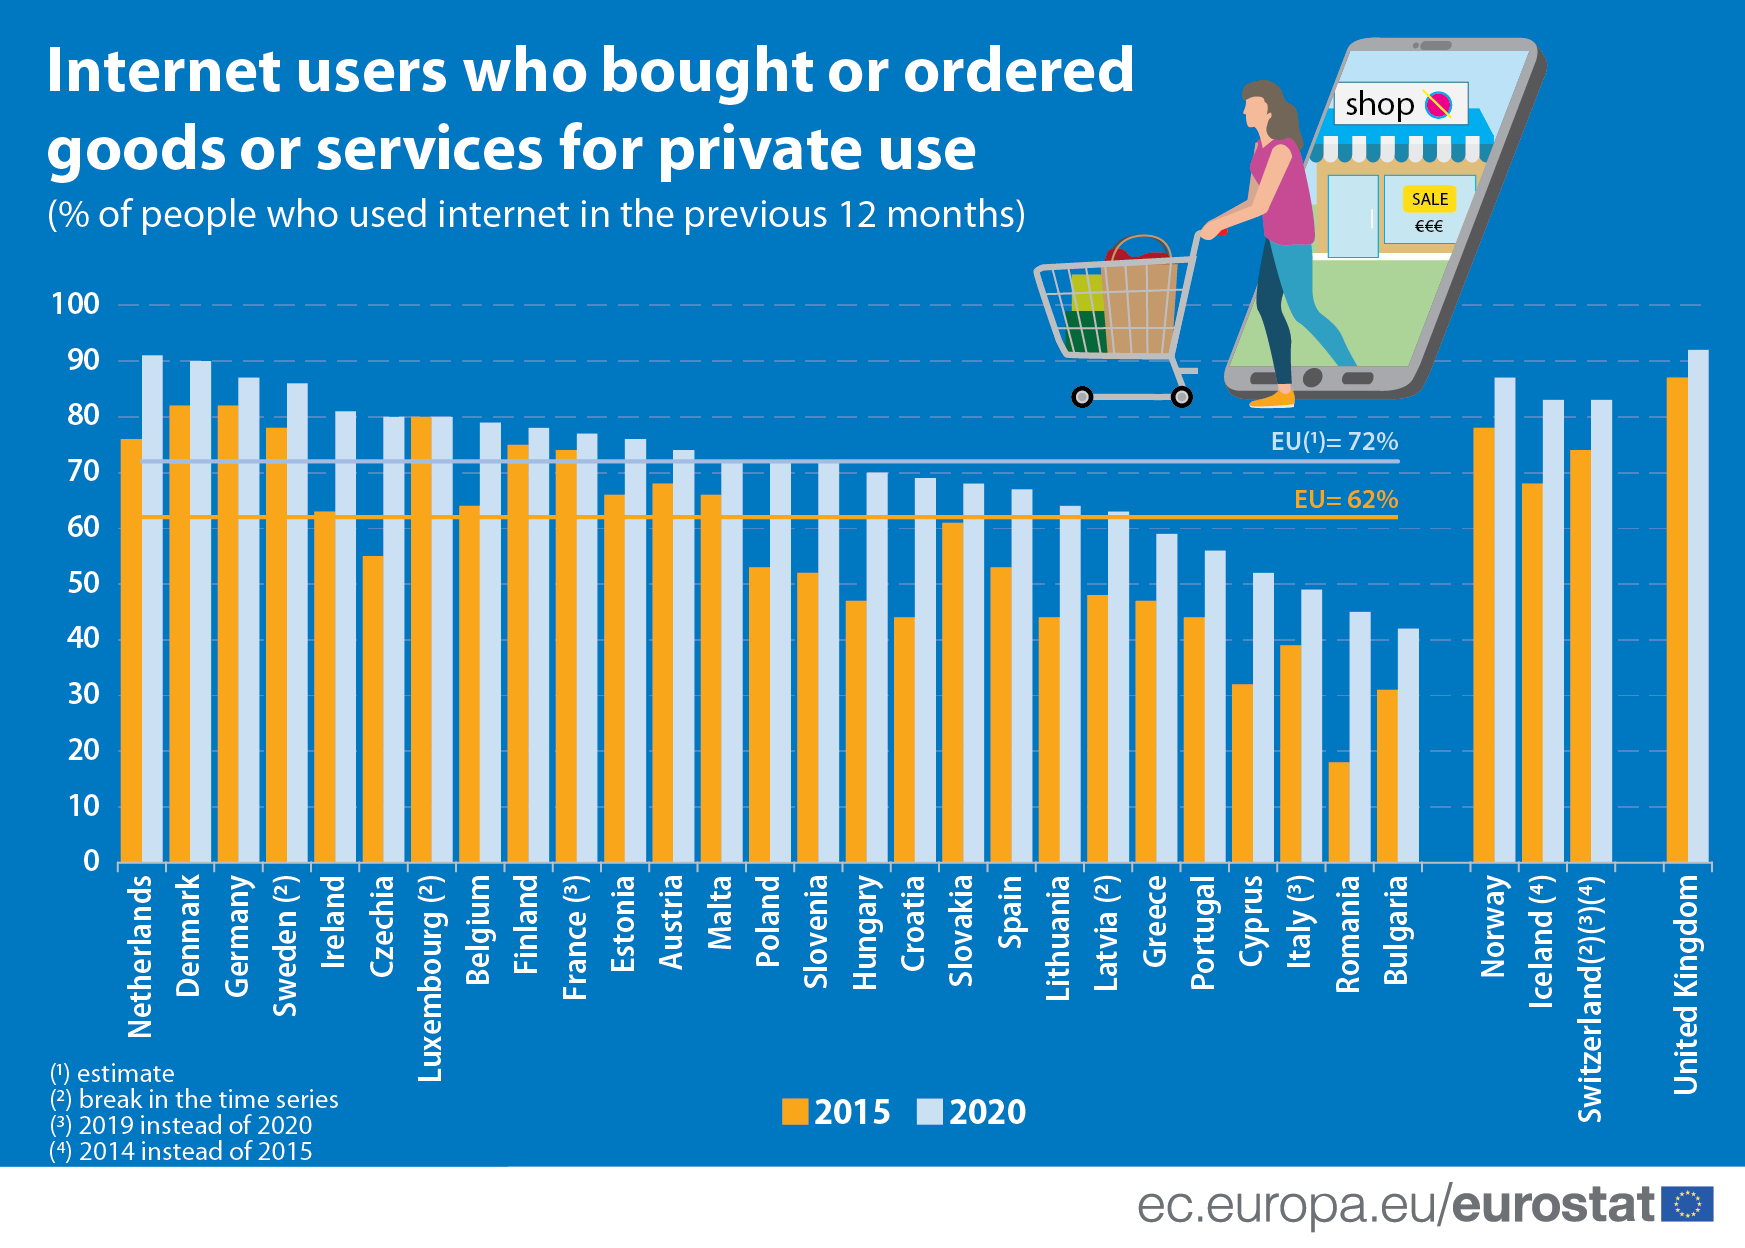 Internet users who bought or ordered goods or services for private use